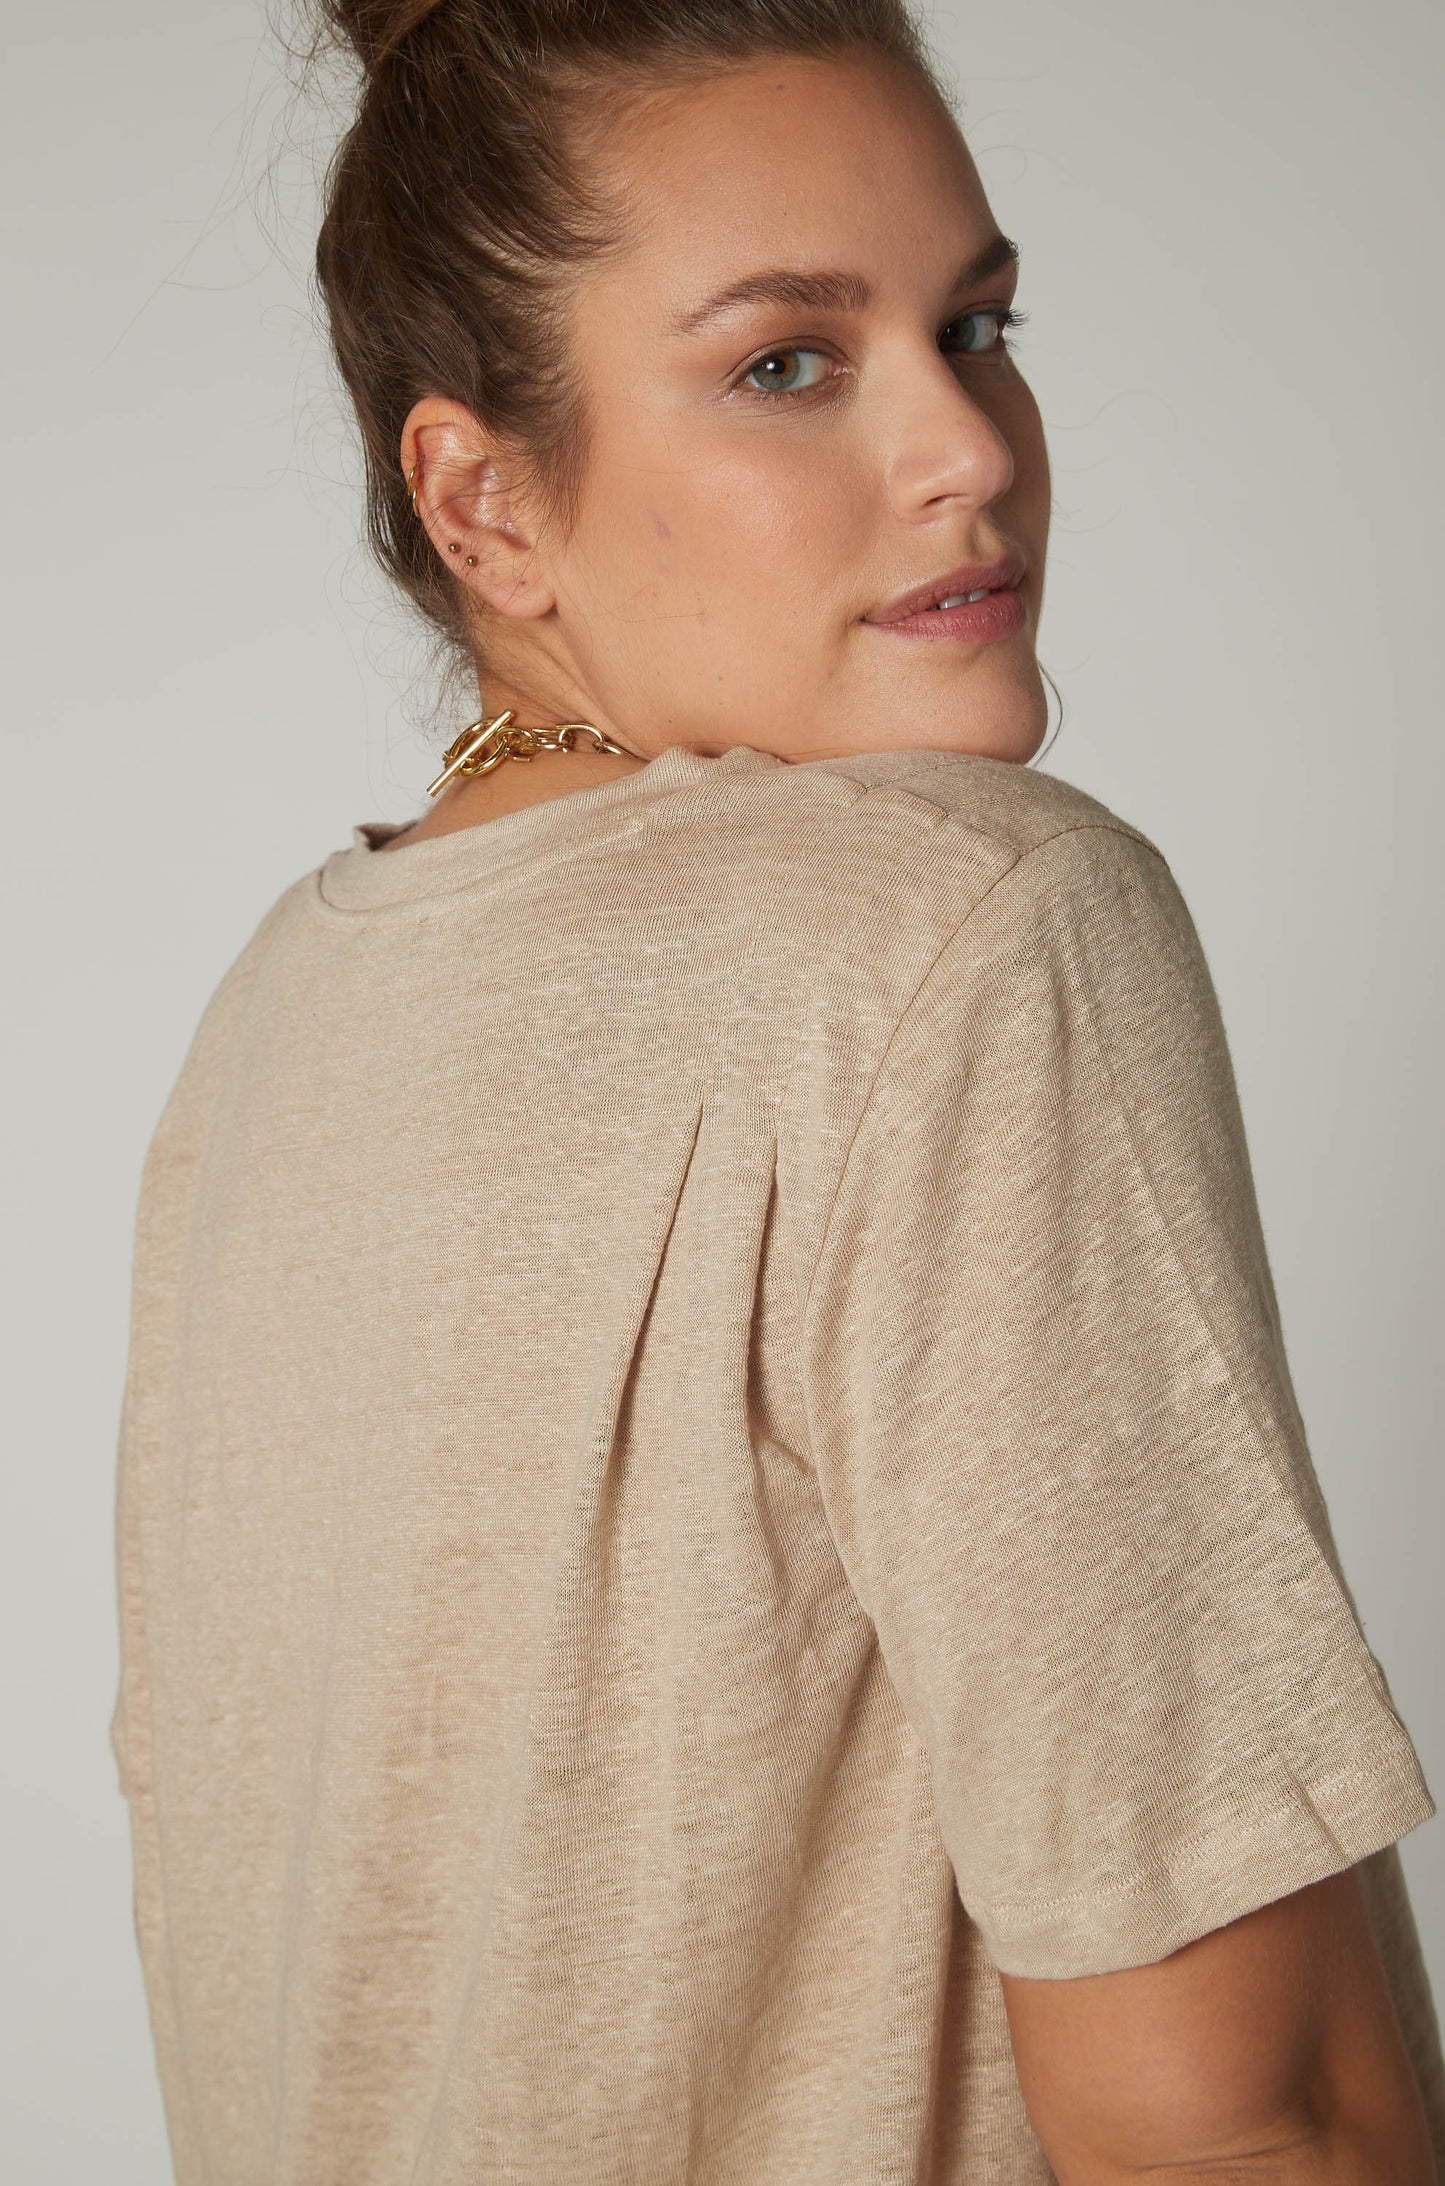 All in the Details Linen Half Sleeve Top